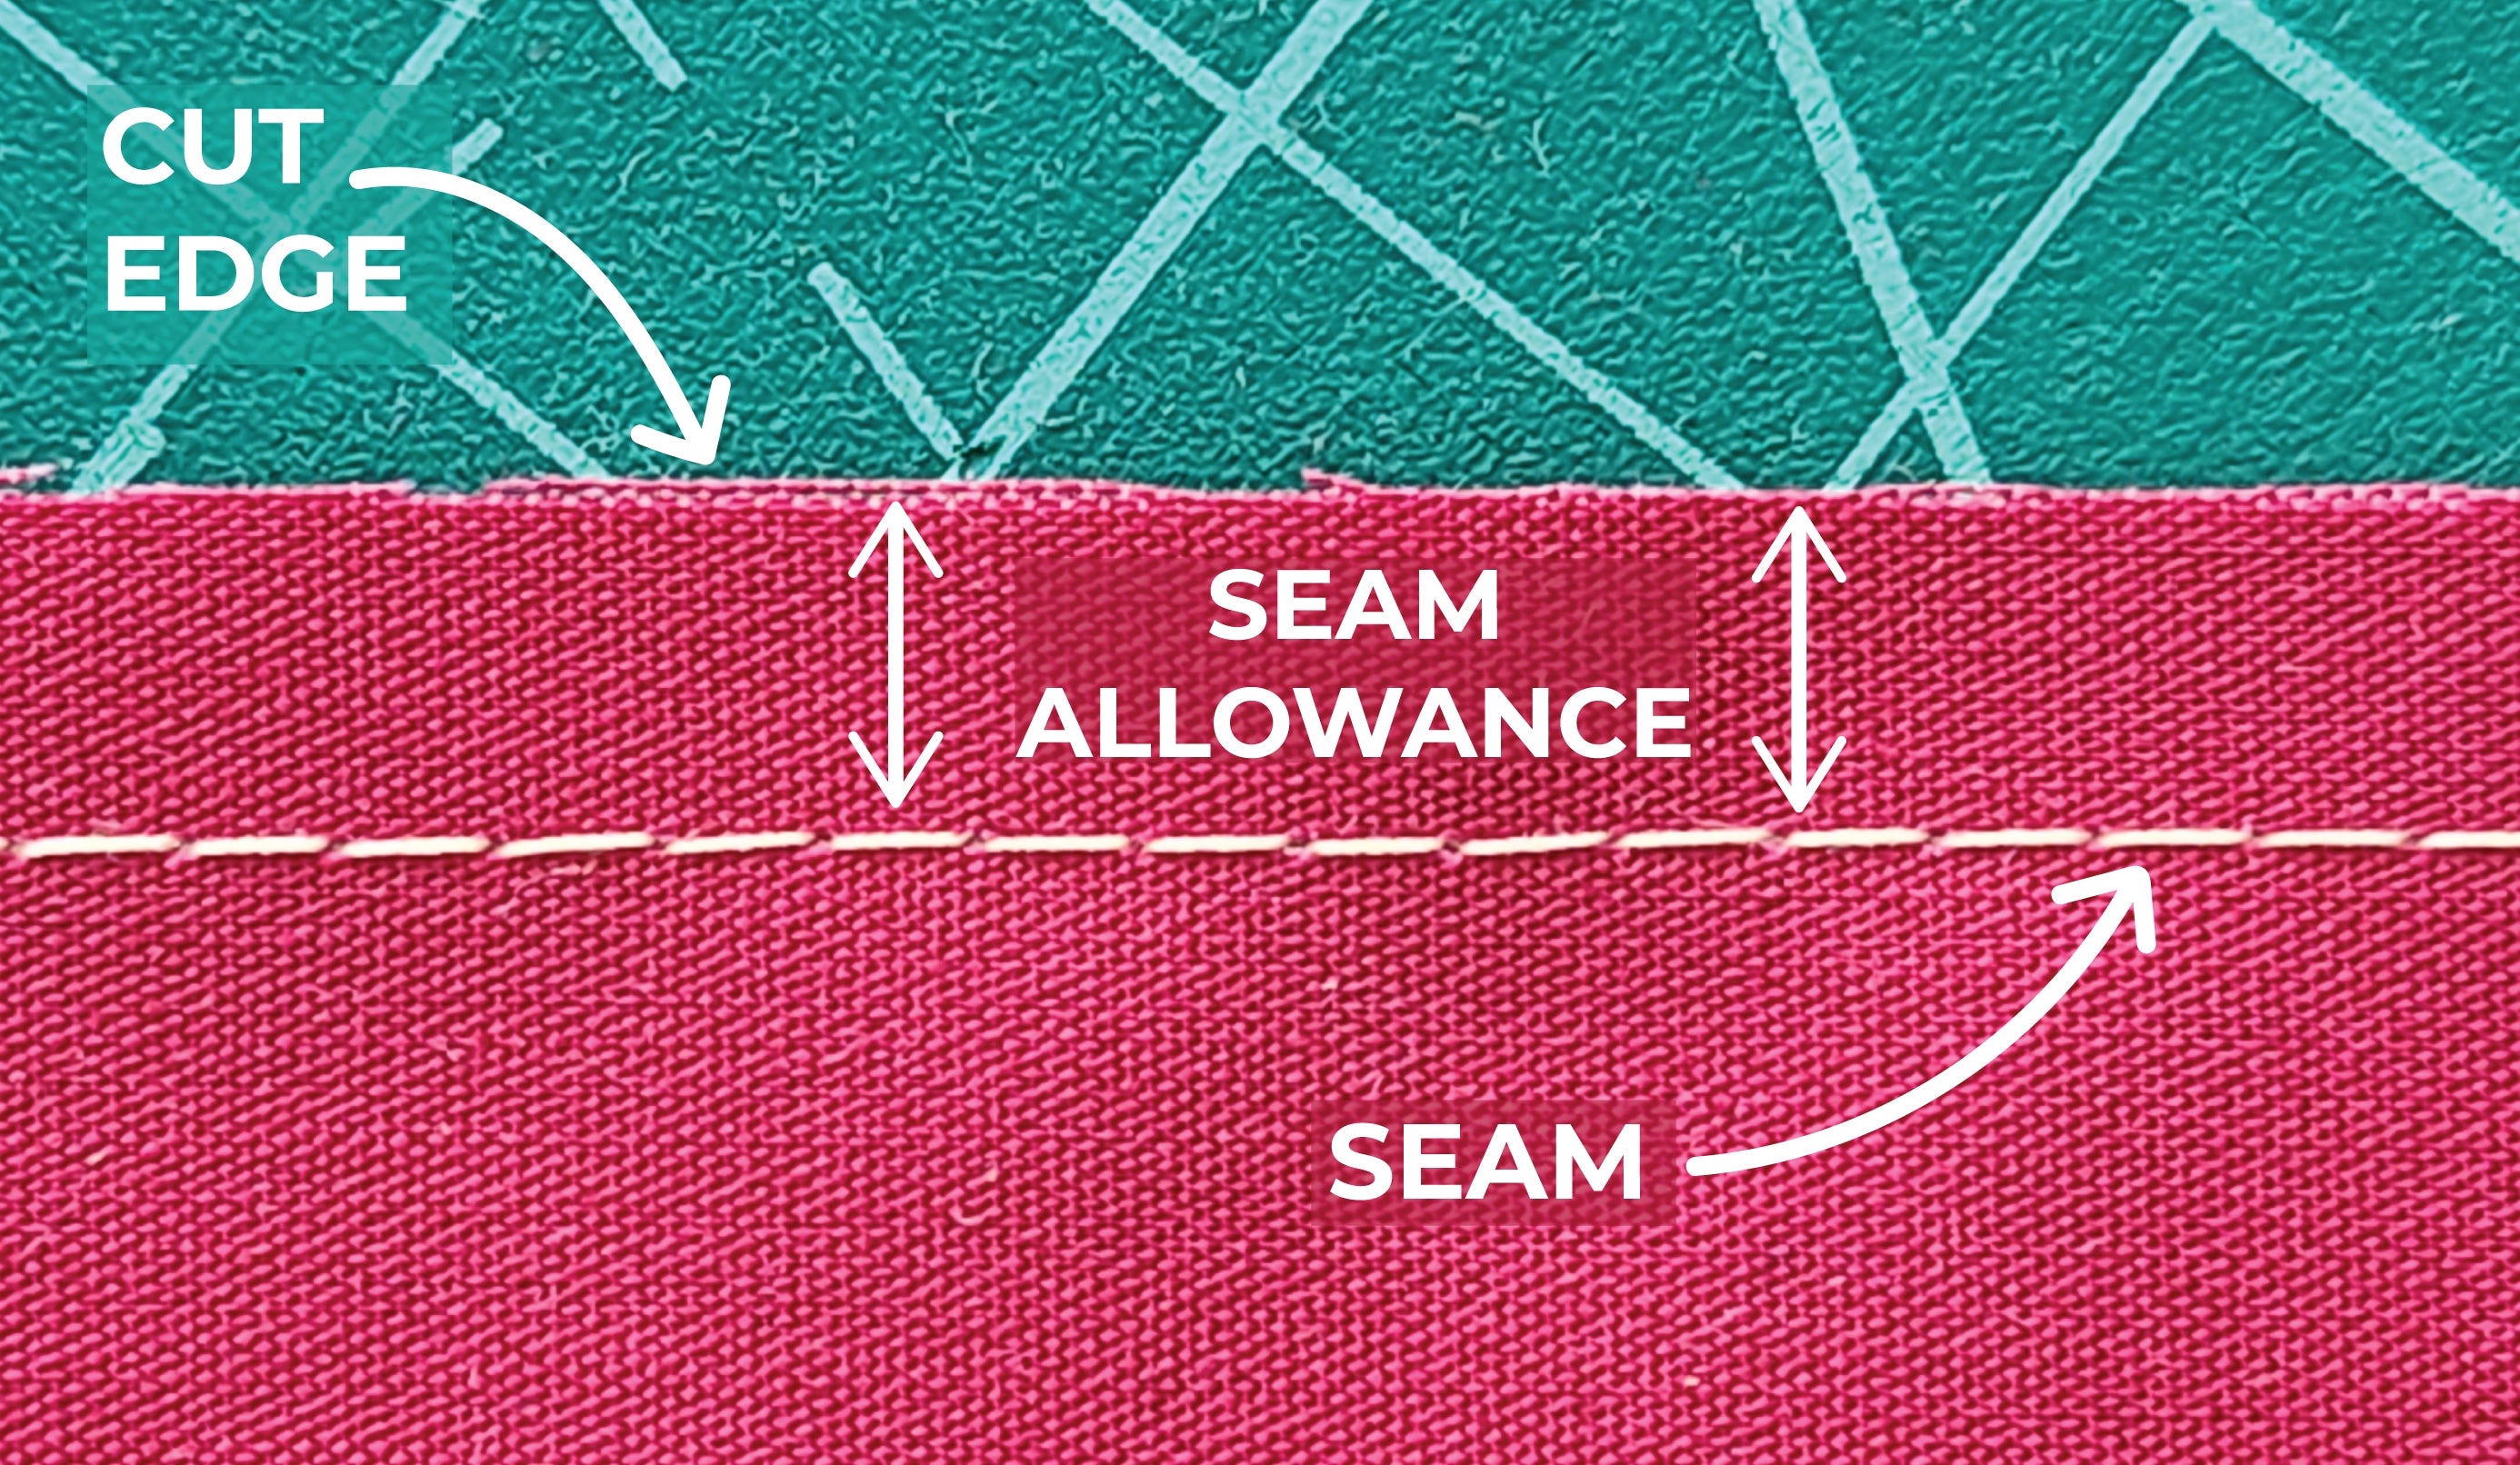 How to Perfect your Seam Allowance | Lo & Behold Stitchery